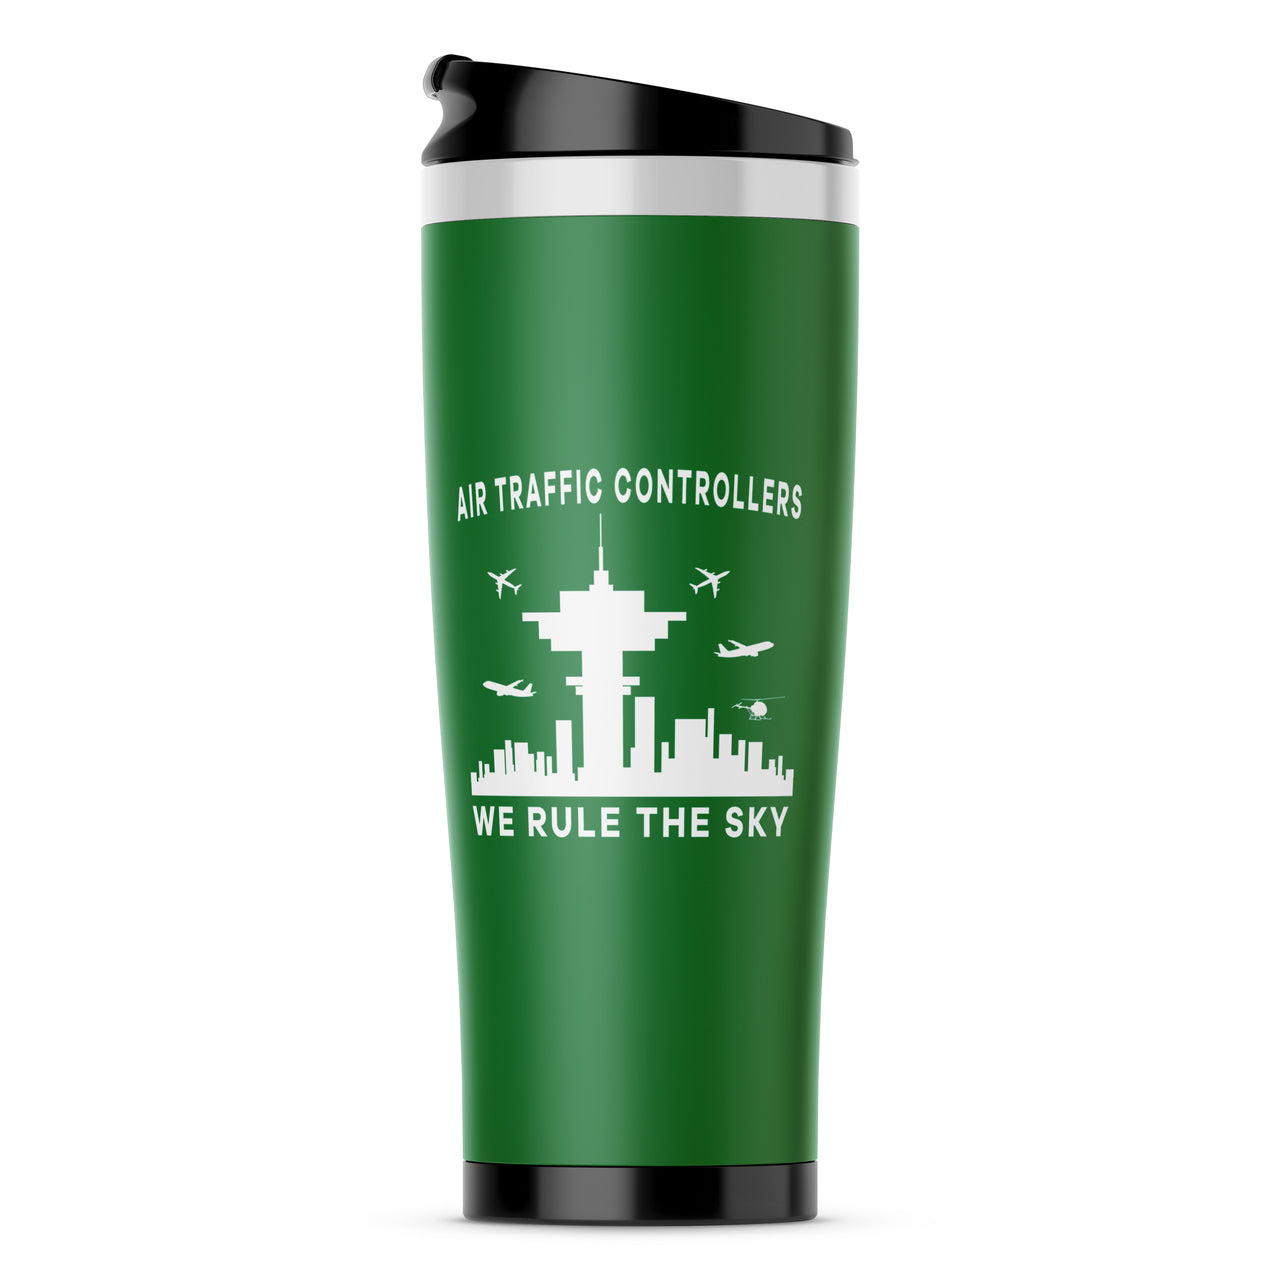 Air Traffic Controllers - We Rule The Sky Designed Stainless Steel Travel Mugs